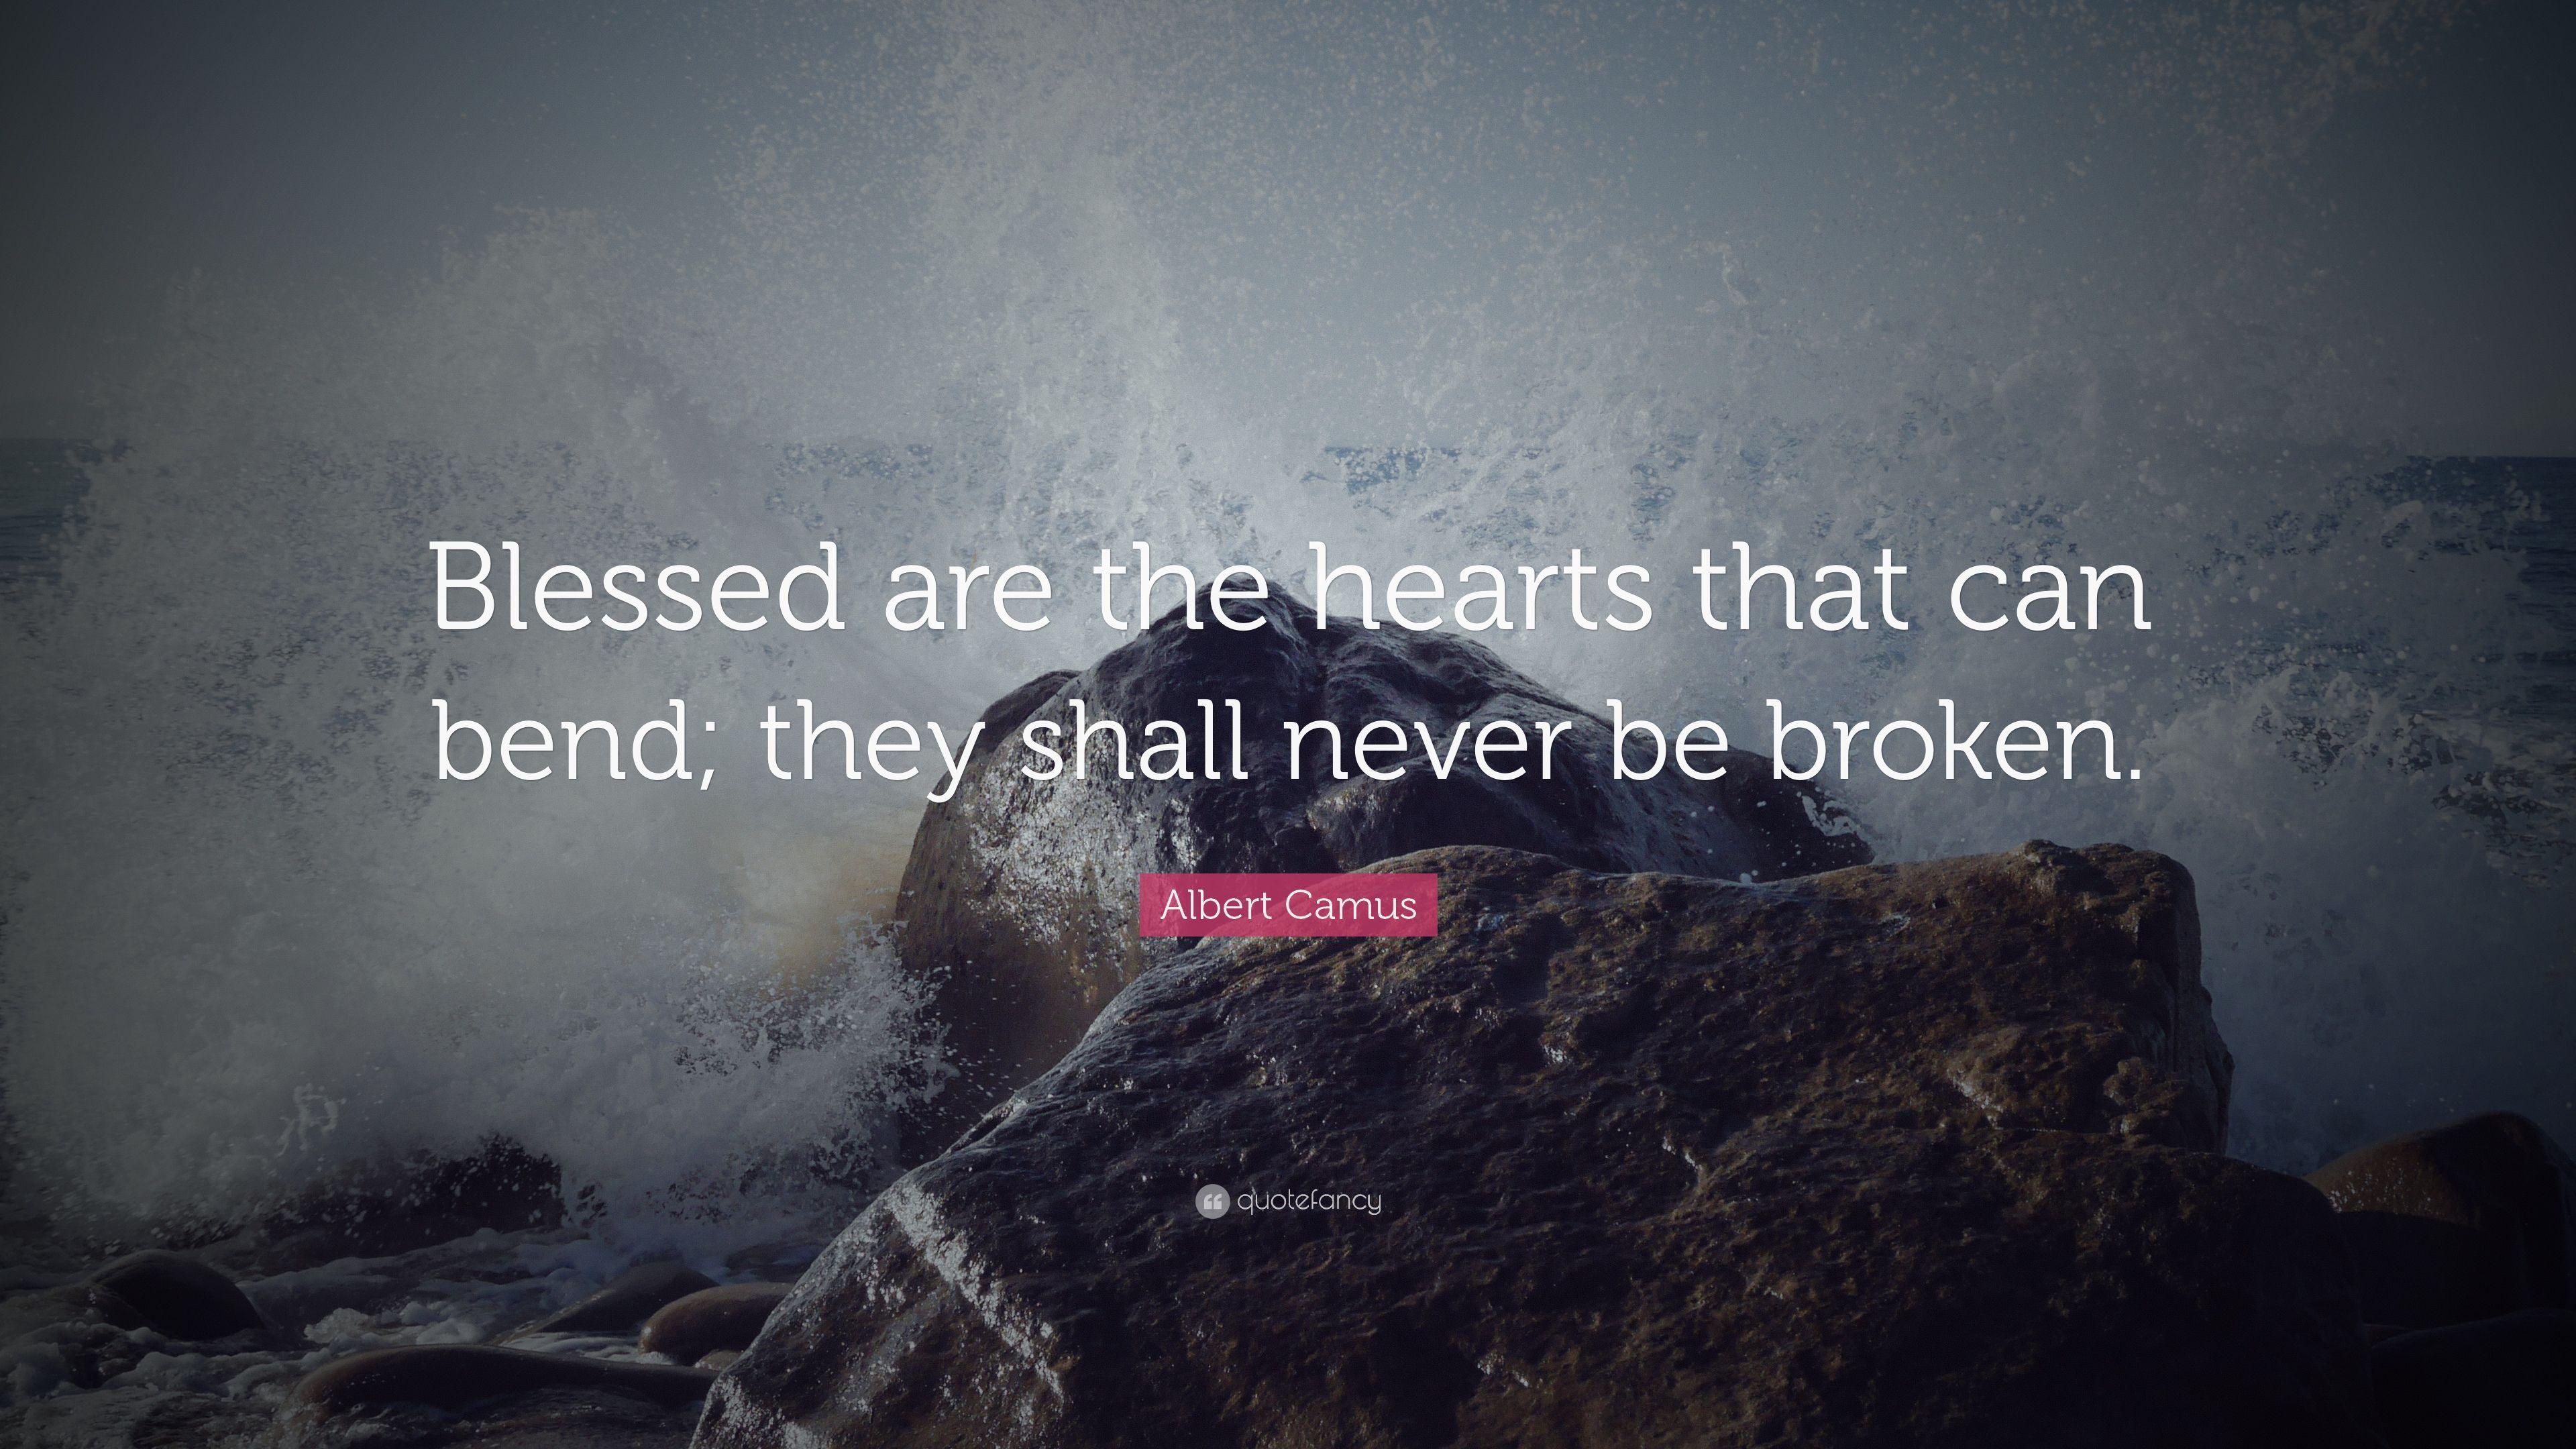 Albert Camus Quote: “Blessed are the hearts that can bend; they